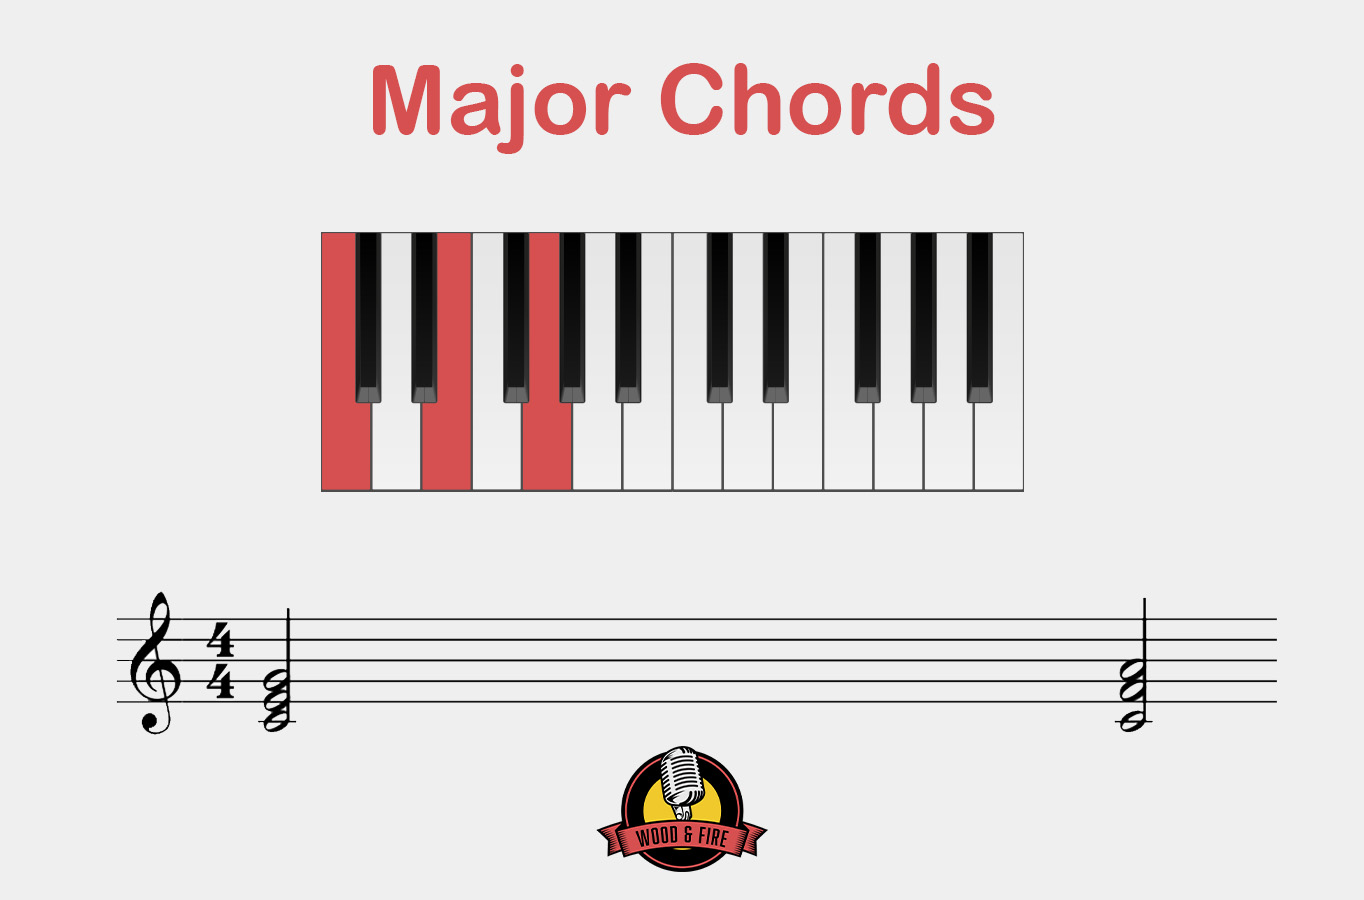 Major chords simply explained